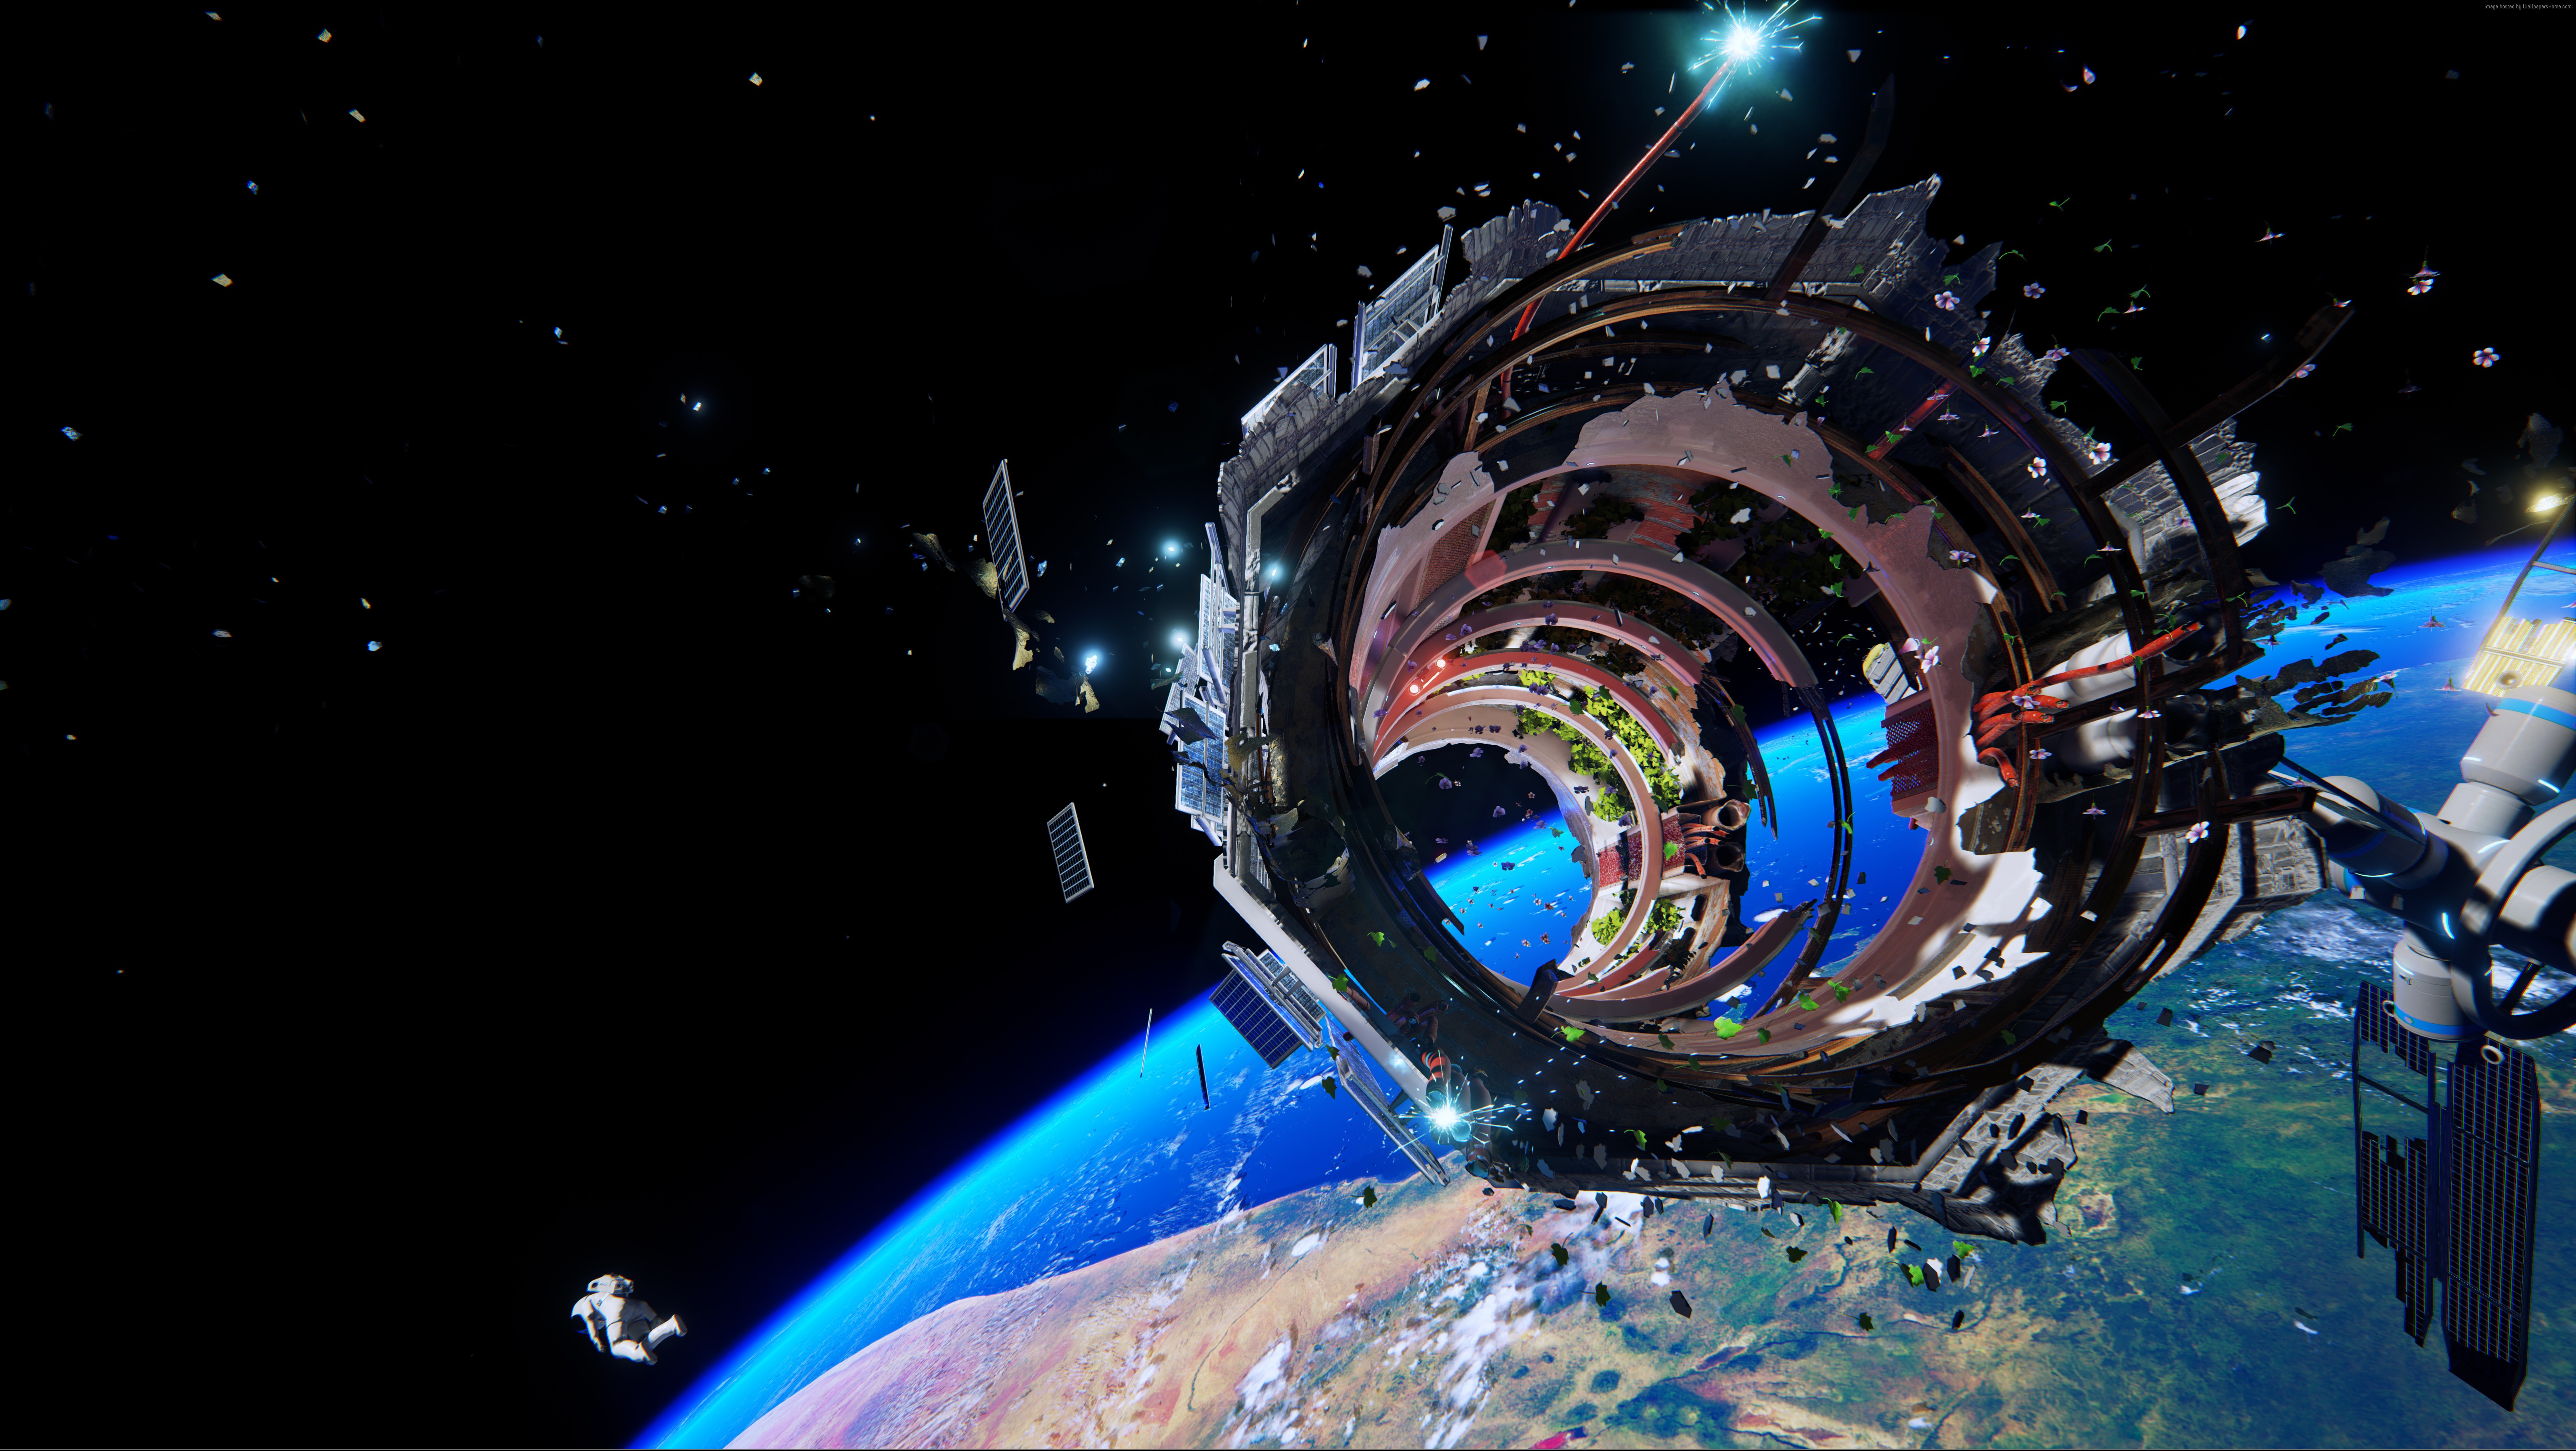 ADR1FT Wallpaper Games Simulation ADR1FT 2015 game space